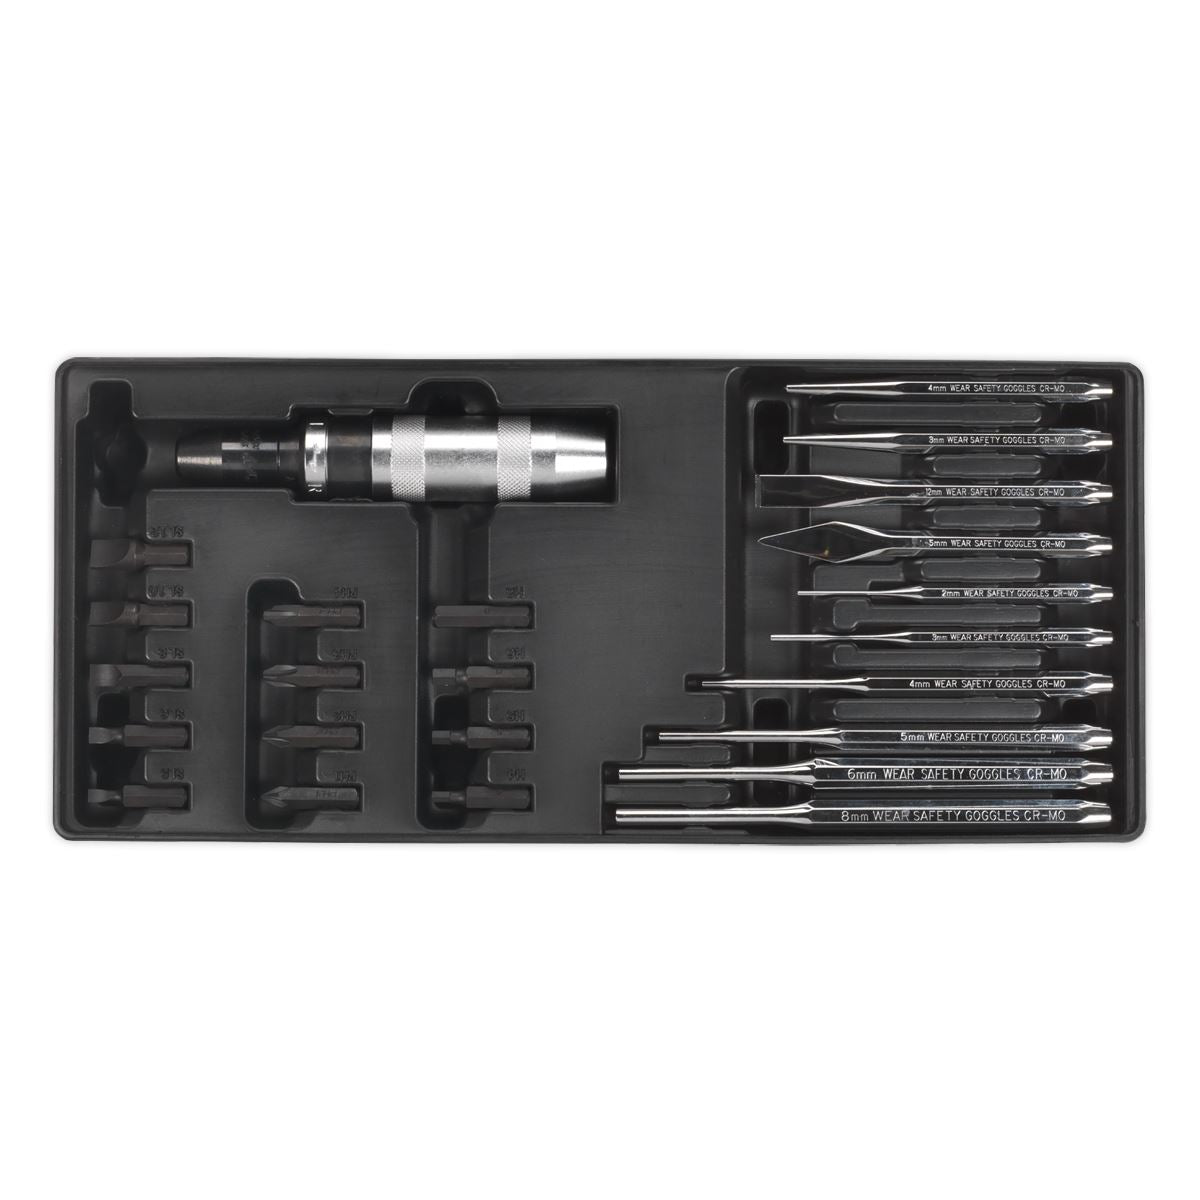 Sealey Premier Tool Tray with Punch & Impact Driver Set 25pc